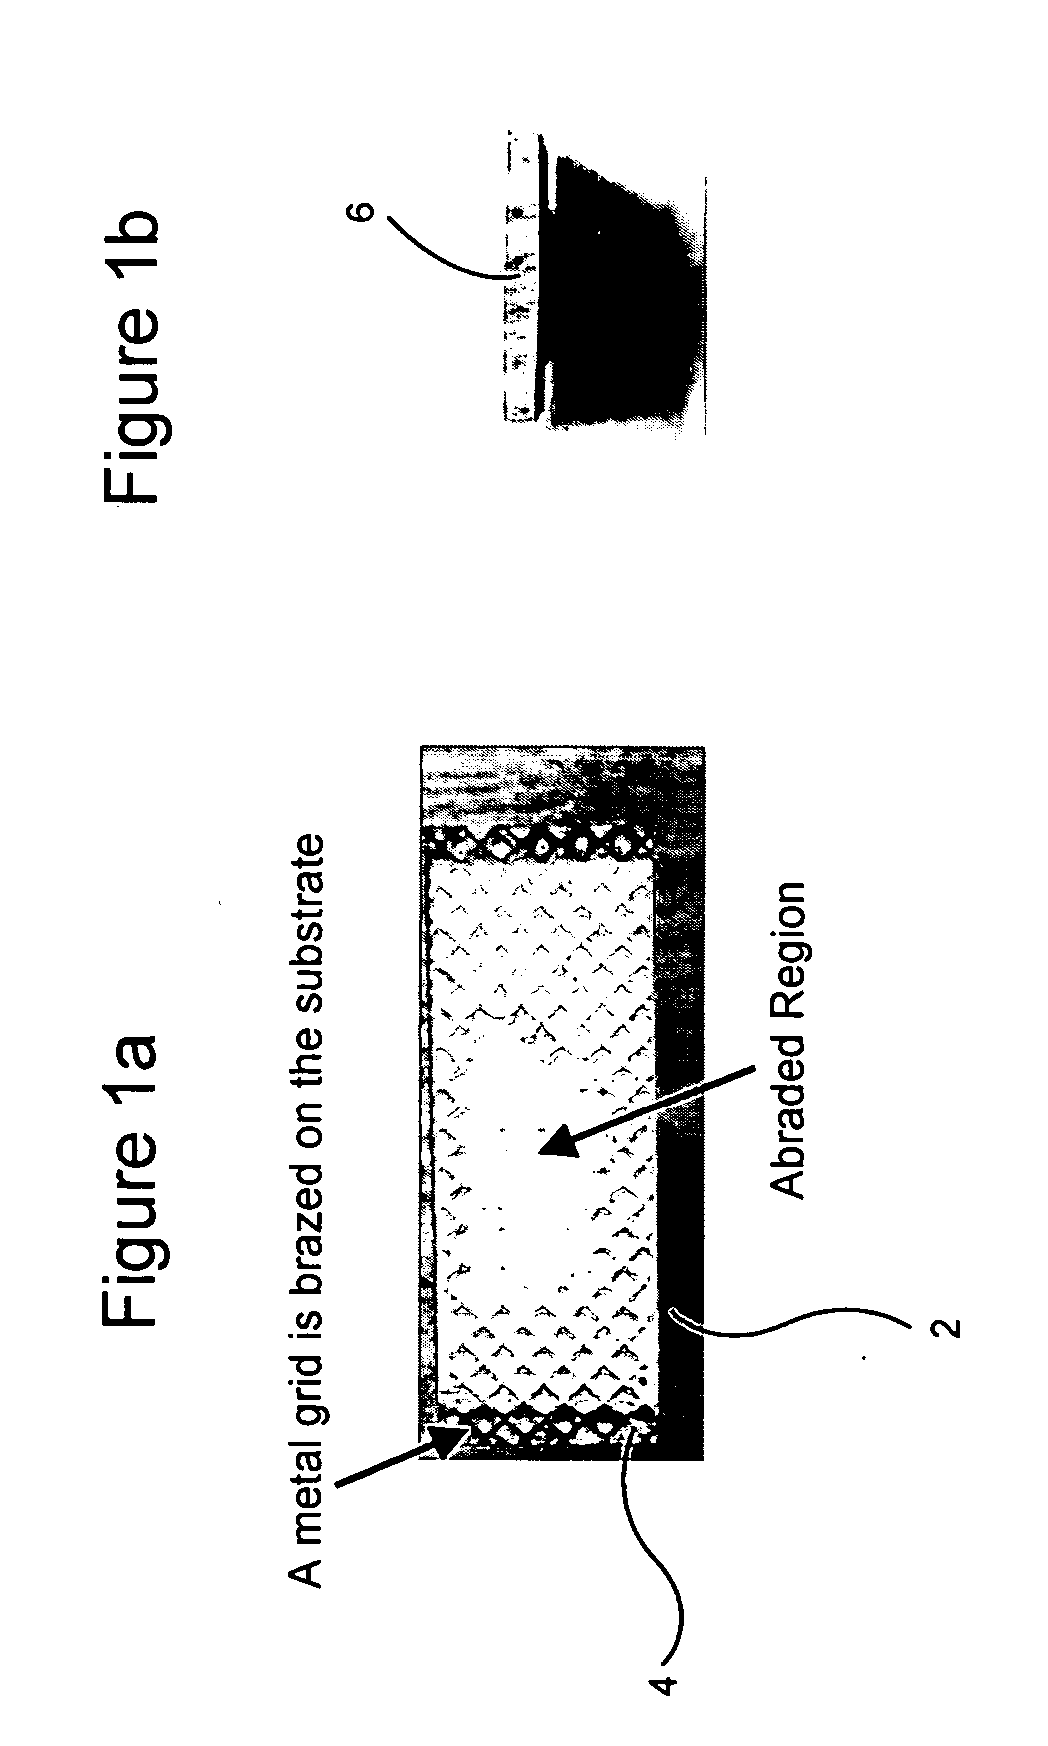 7FAstage 1 abradable coatings and method for making same